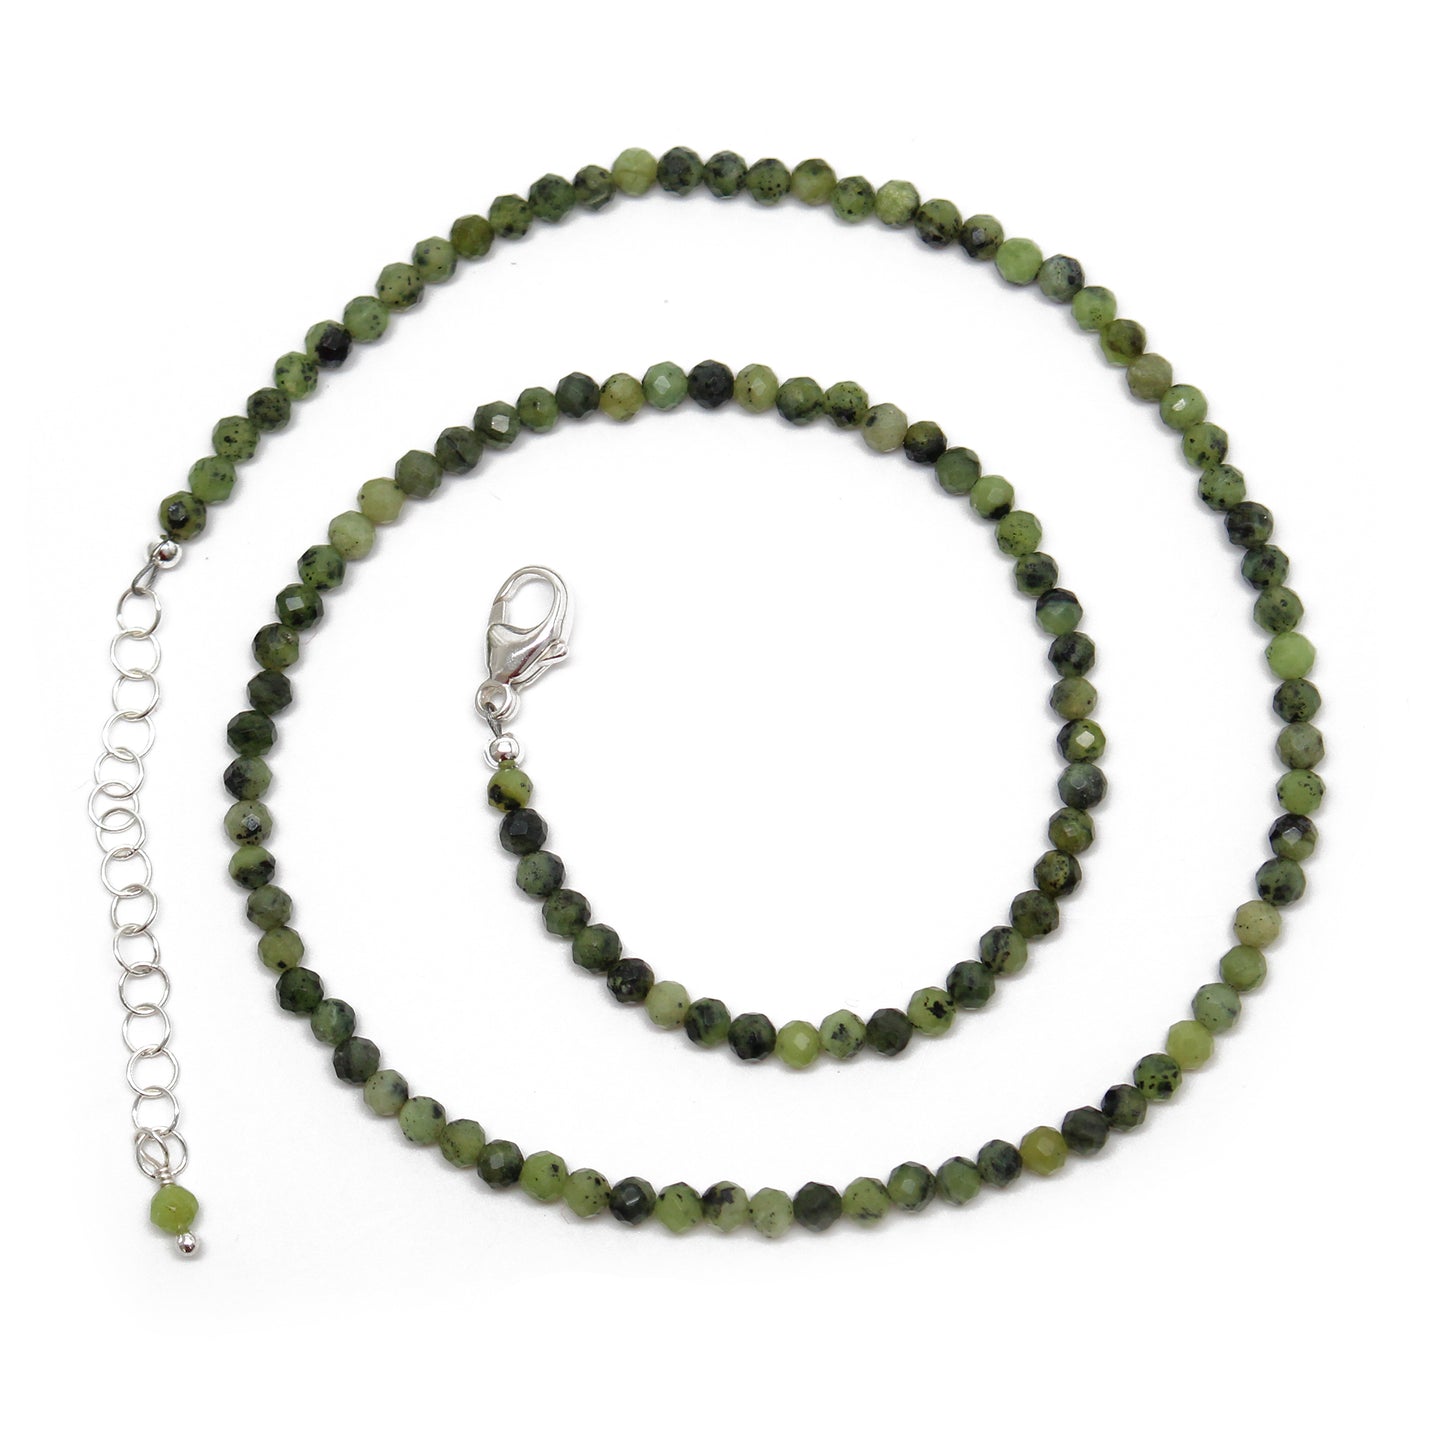 Nephrite Jade Choker Necklace Adjustable to 16.5 Inches